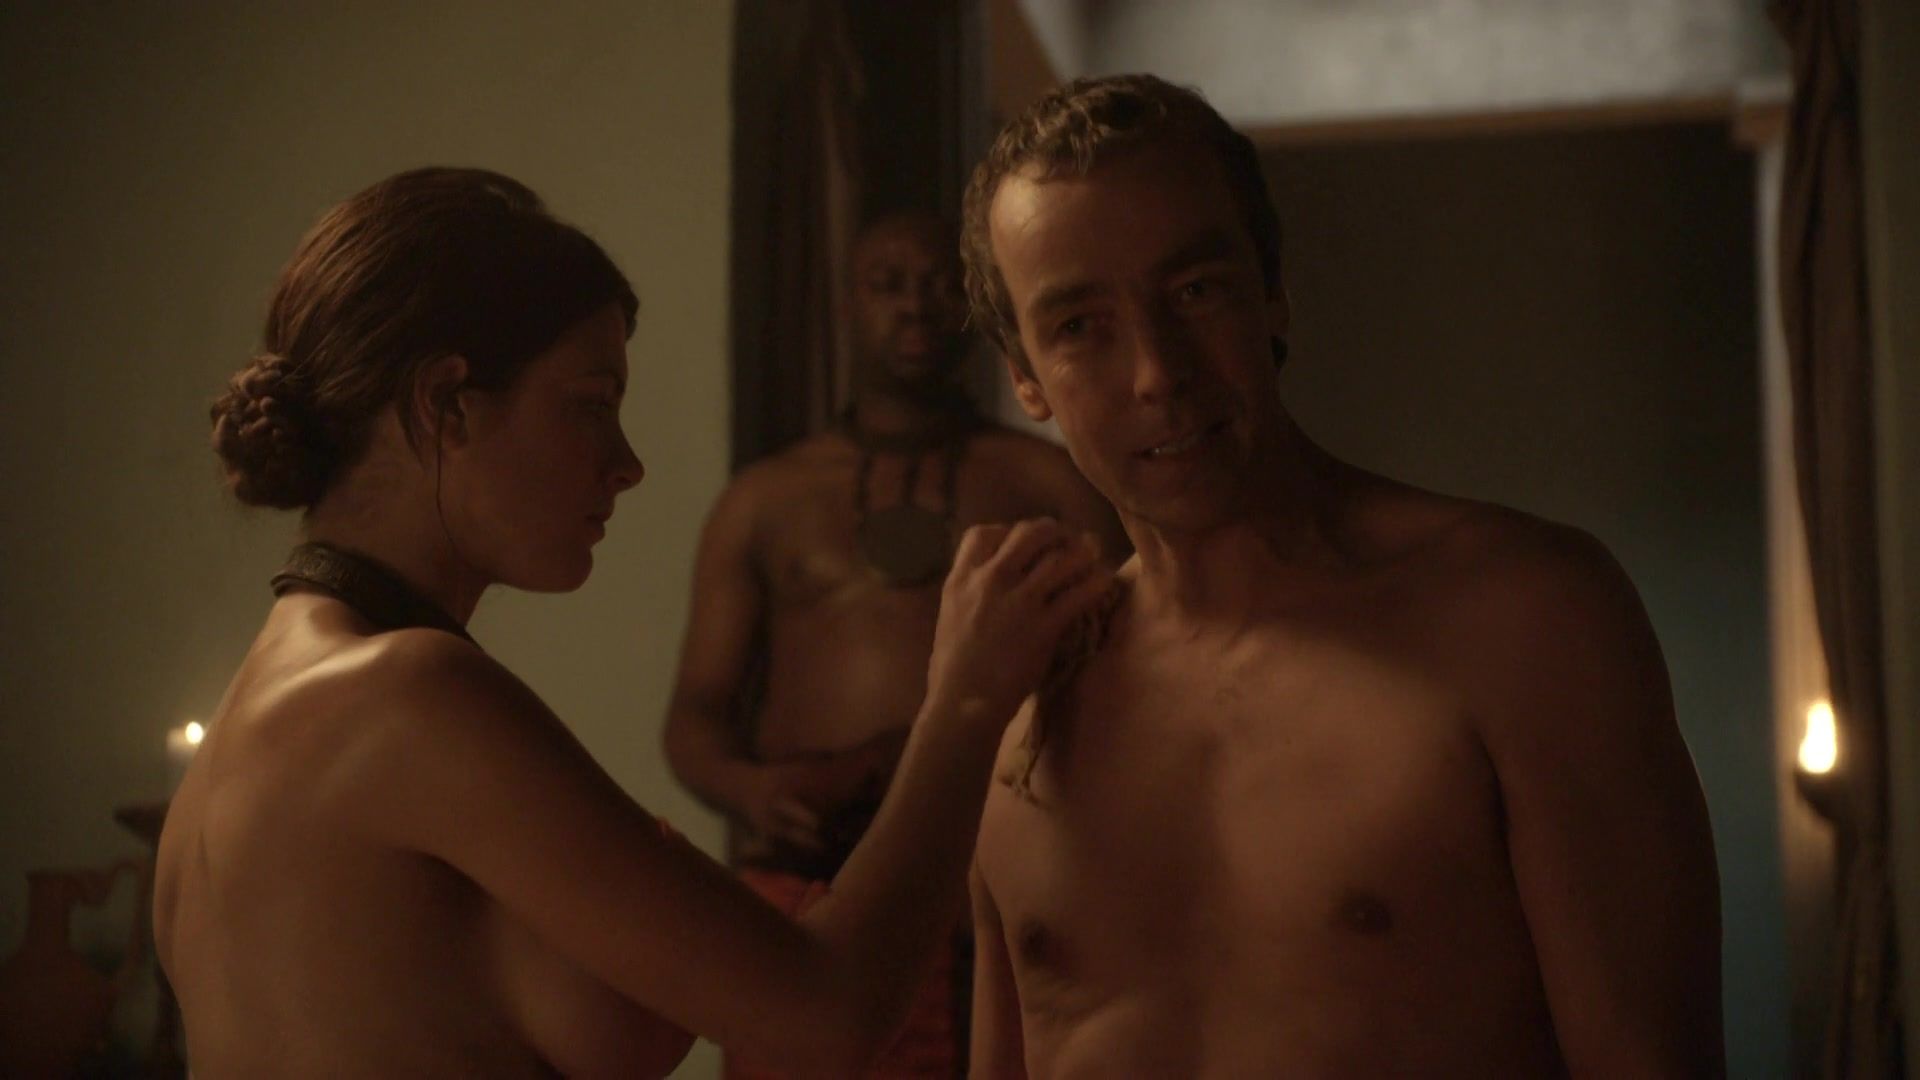 Masseur Topless Lucy Lawless, Lesley-Ann Brandt - Spartacus Blood and Sand s01e06 (2010) Ass Worship - 1